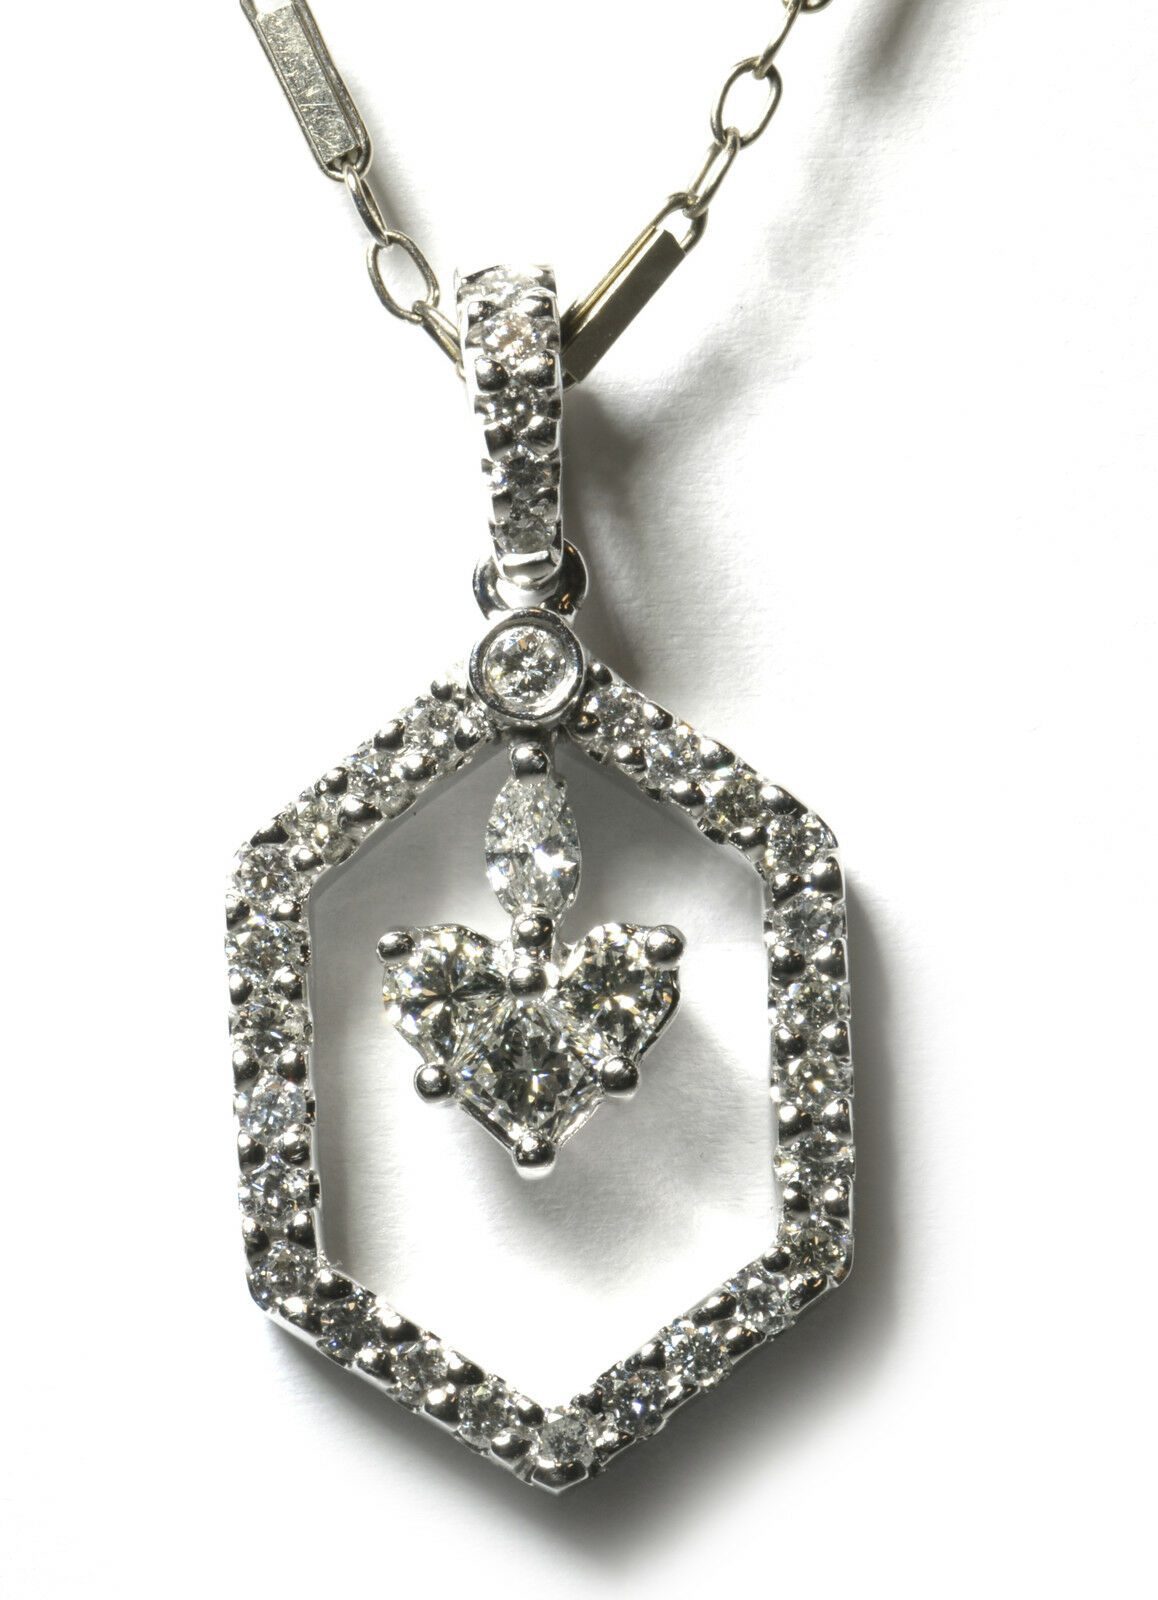 Diamond-Surrounded-Dangling-Heart-Pendant-Necklace-in-18k-White-Gold-6-ct-TDW-131707236742